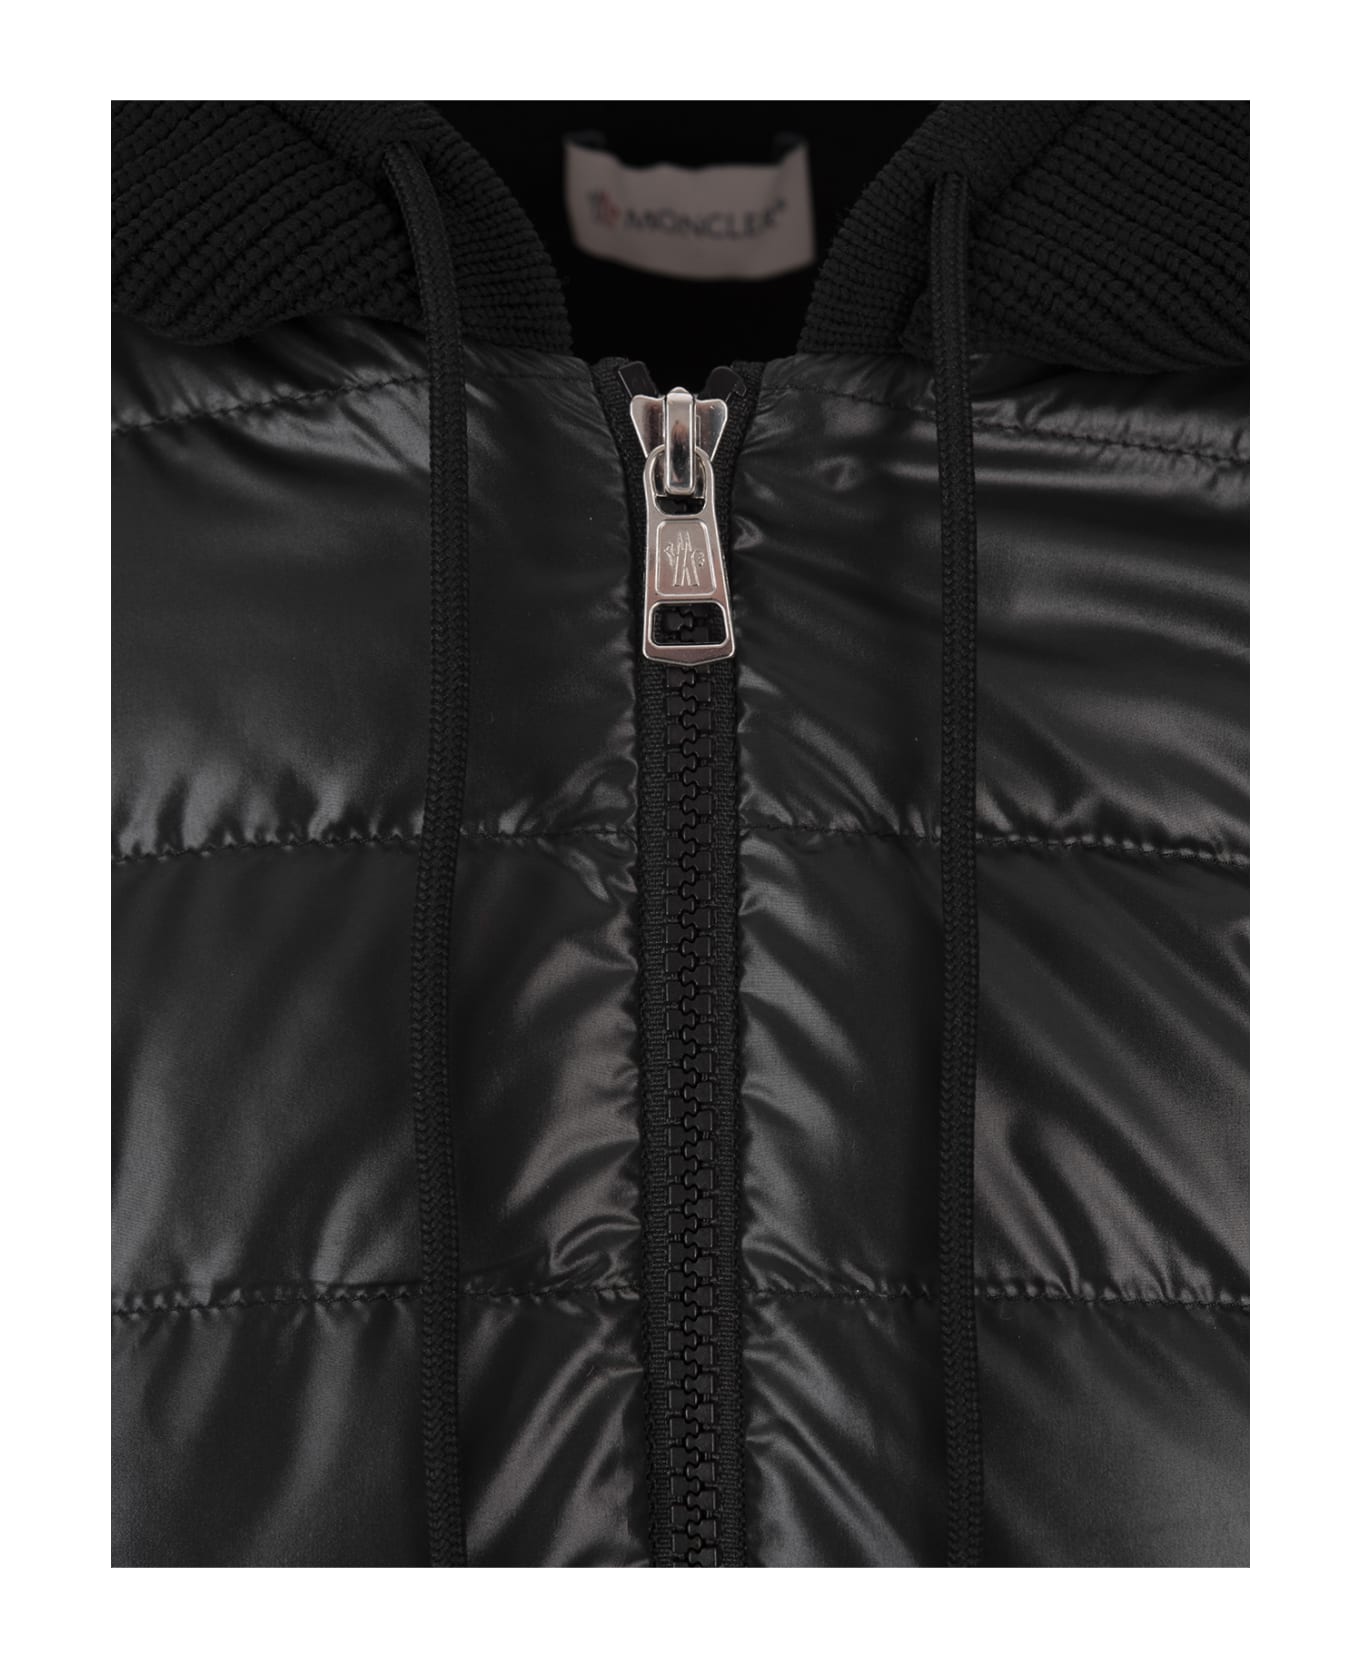 Moncler Padded Tricot Cardigan With Hood In Black - Black ダウンジャケット